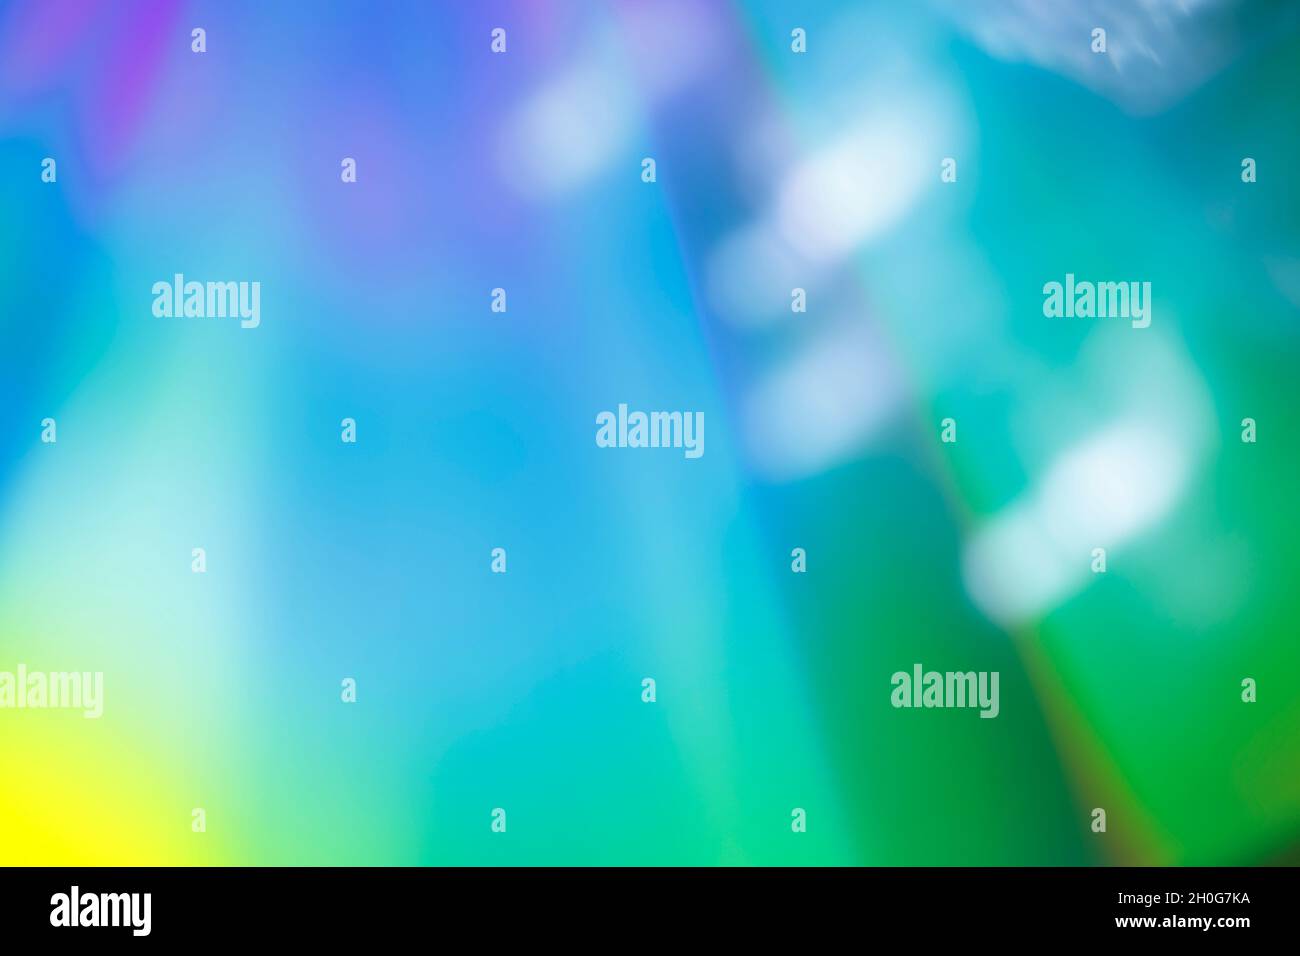 Bright, vibrant, colorful and blurred abstract background. Abstract high resolution soft multi-colored background. Copy space. Stock Photo